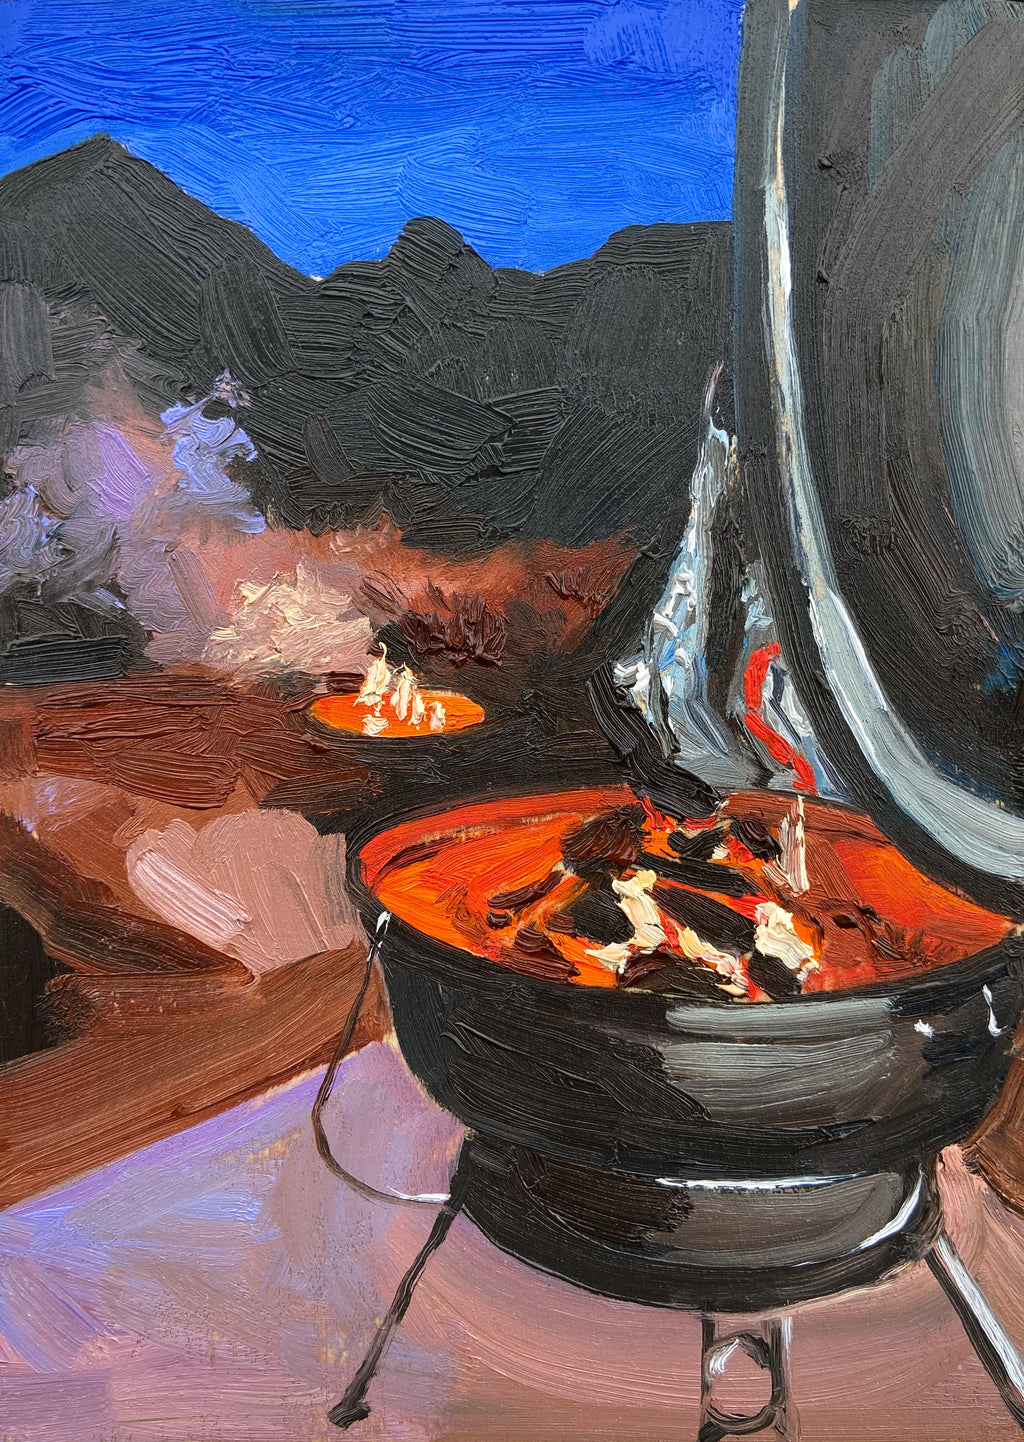 Red Cliffs: charcoal and fire